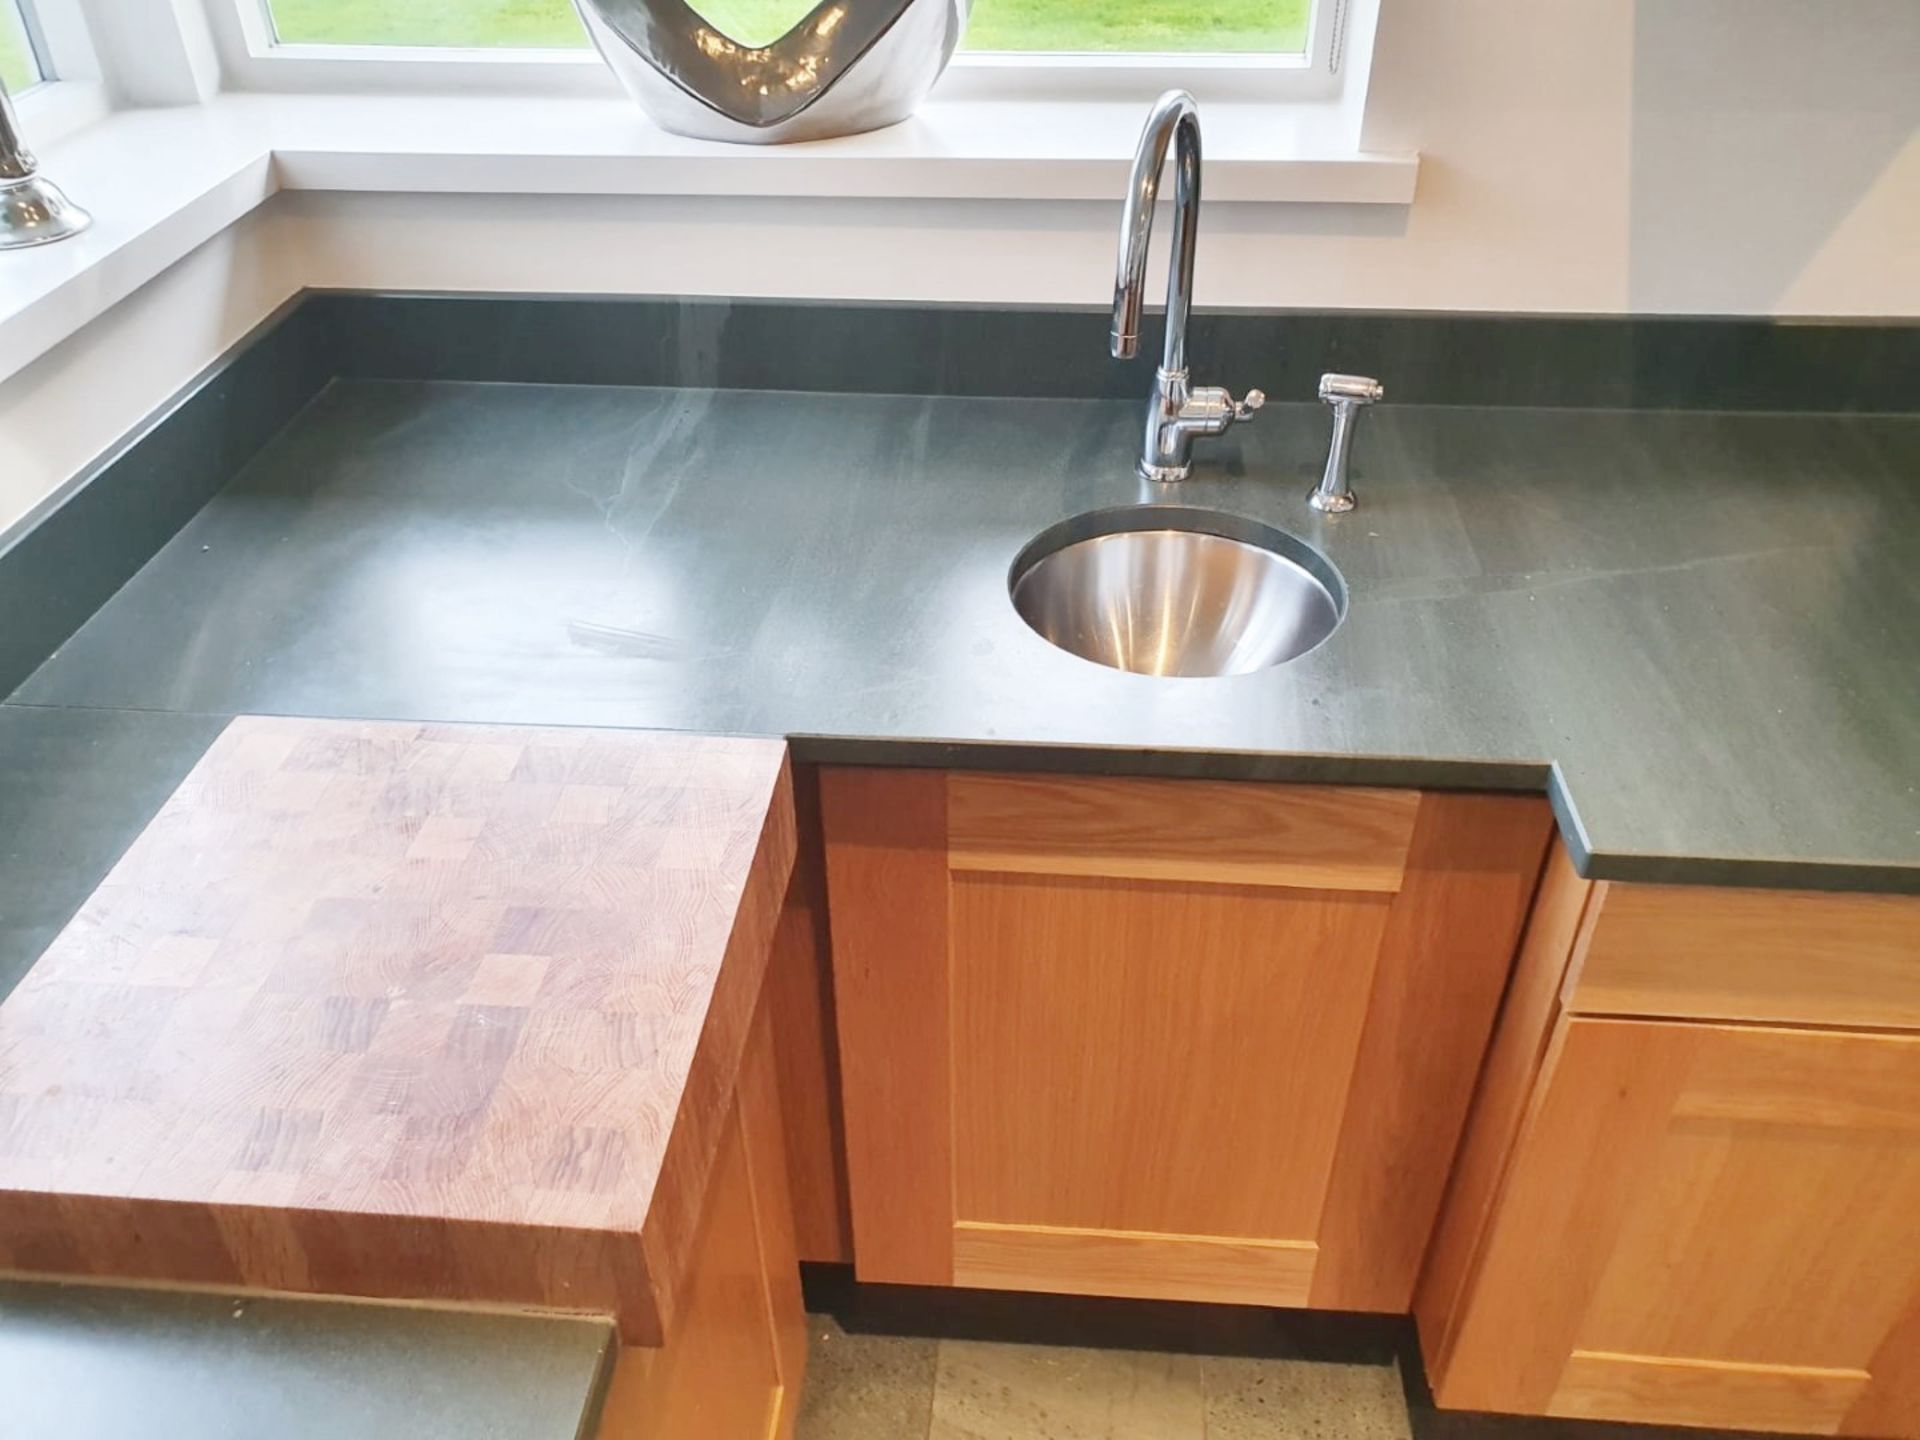 1 x Solid Oak Fitted Kitchen With Intergrated Miele Appliancess - CL487 - Location: Wigan *NO VAT* - Image 24 of 82